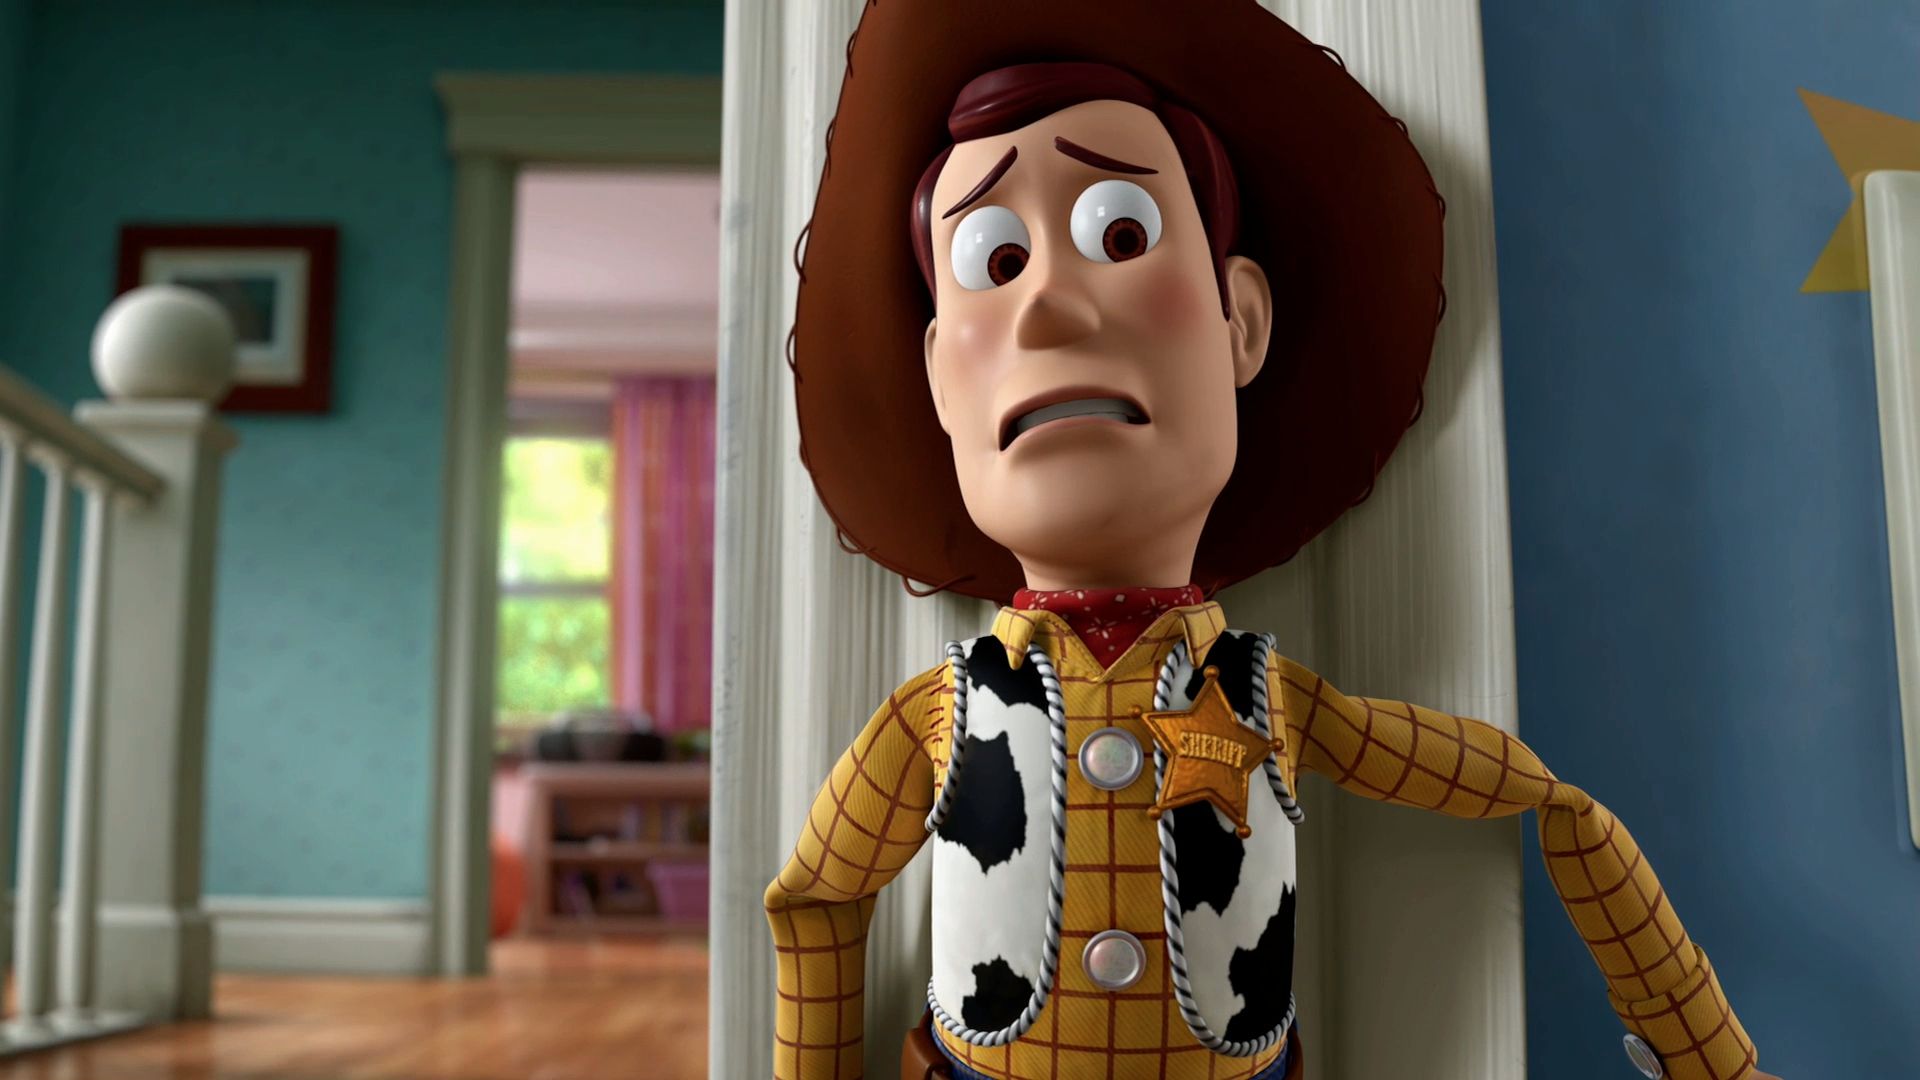 Toy Story Computer Wallpapers, Desktop Backgrounds 1920x1080